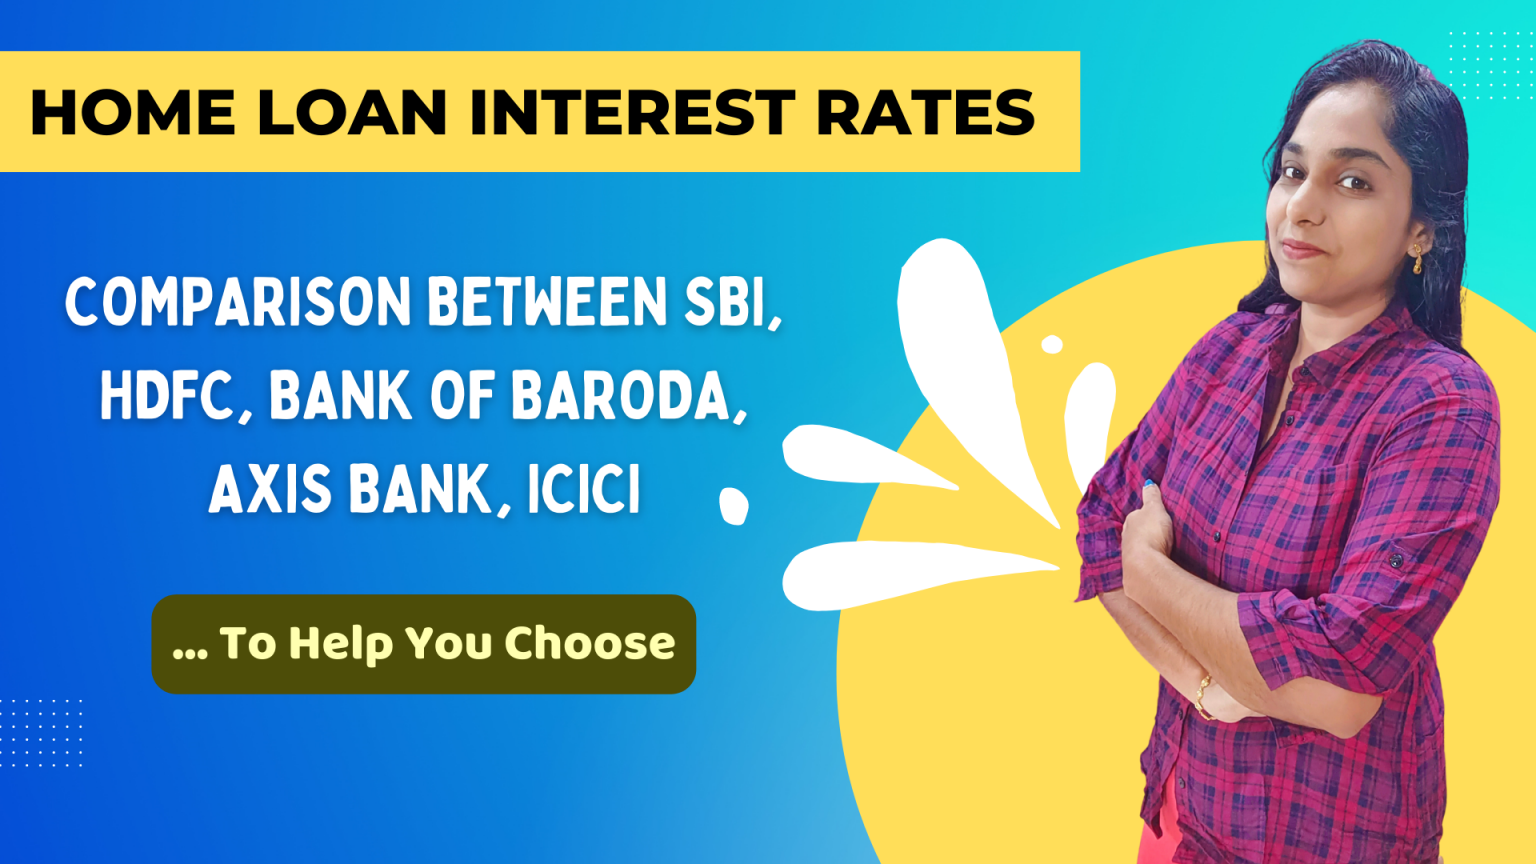 Home Loan Interest Rates Comparison Between Sbi Hdfc Bank Of Baroda Axis Bank To Help You Choose 5044